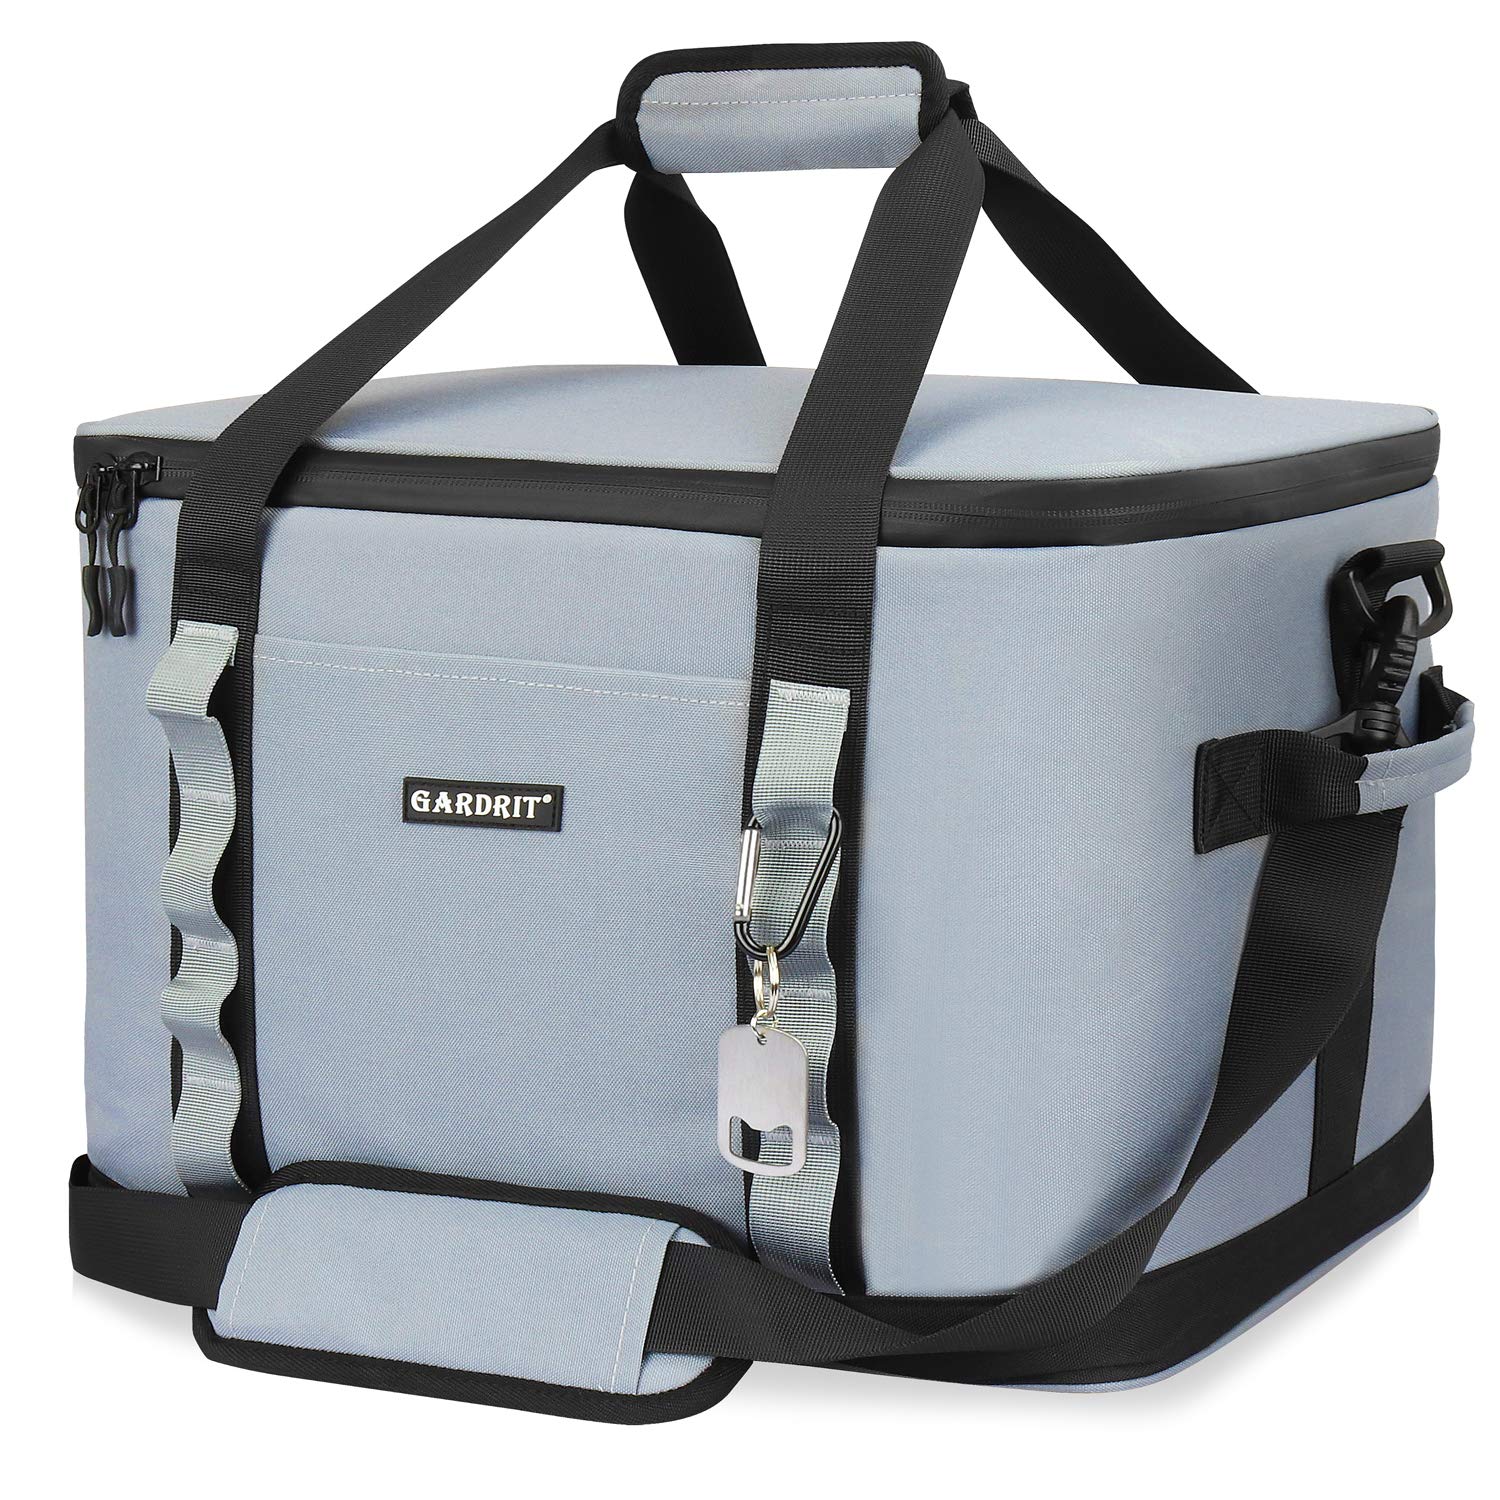 GARDRIT 16/30/60 Can Large Cooler Bag - Collapsible Insulated Lunch Box,  Leakproof Cooler Bag Suitable for Camping, Picnic& Beach (39L) Gray 60 Cans